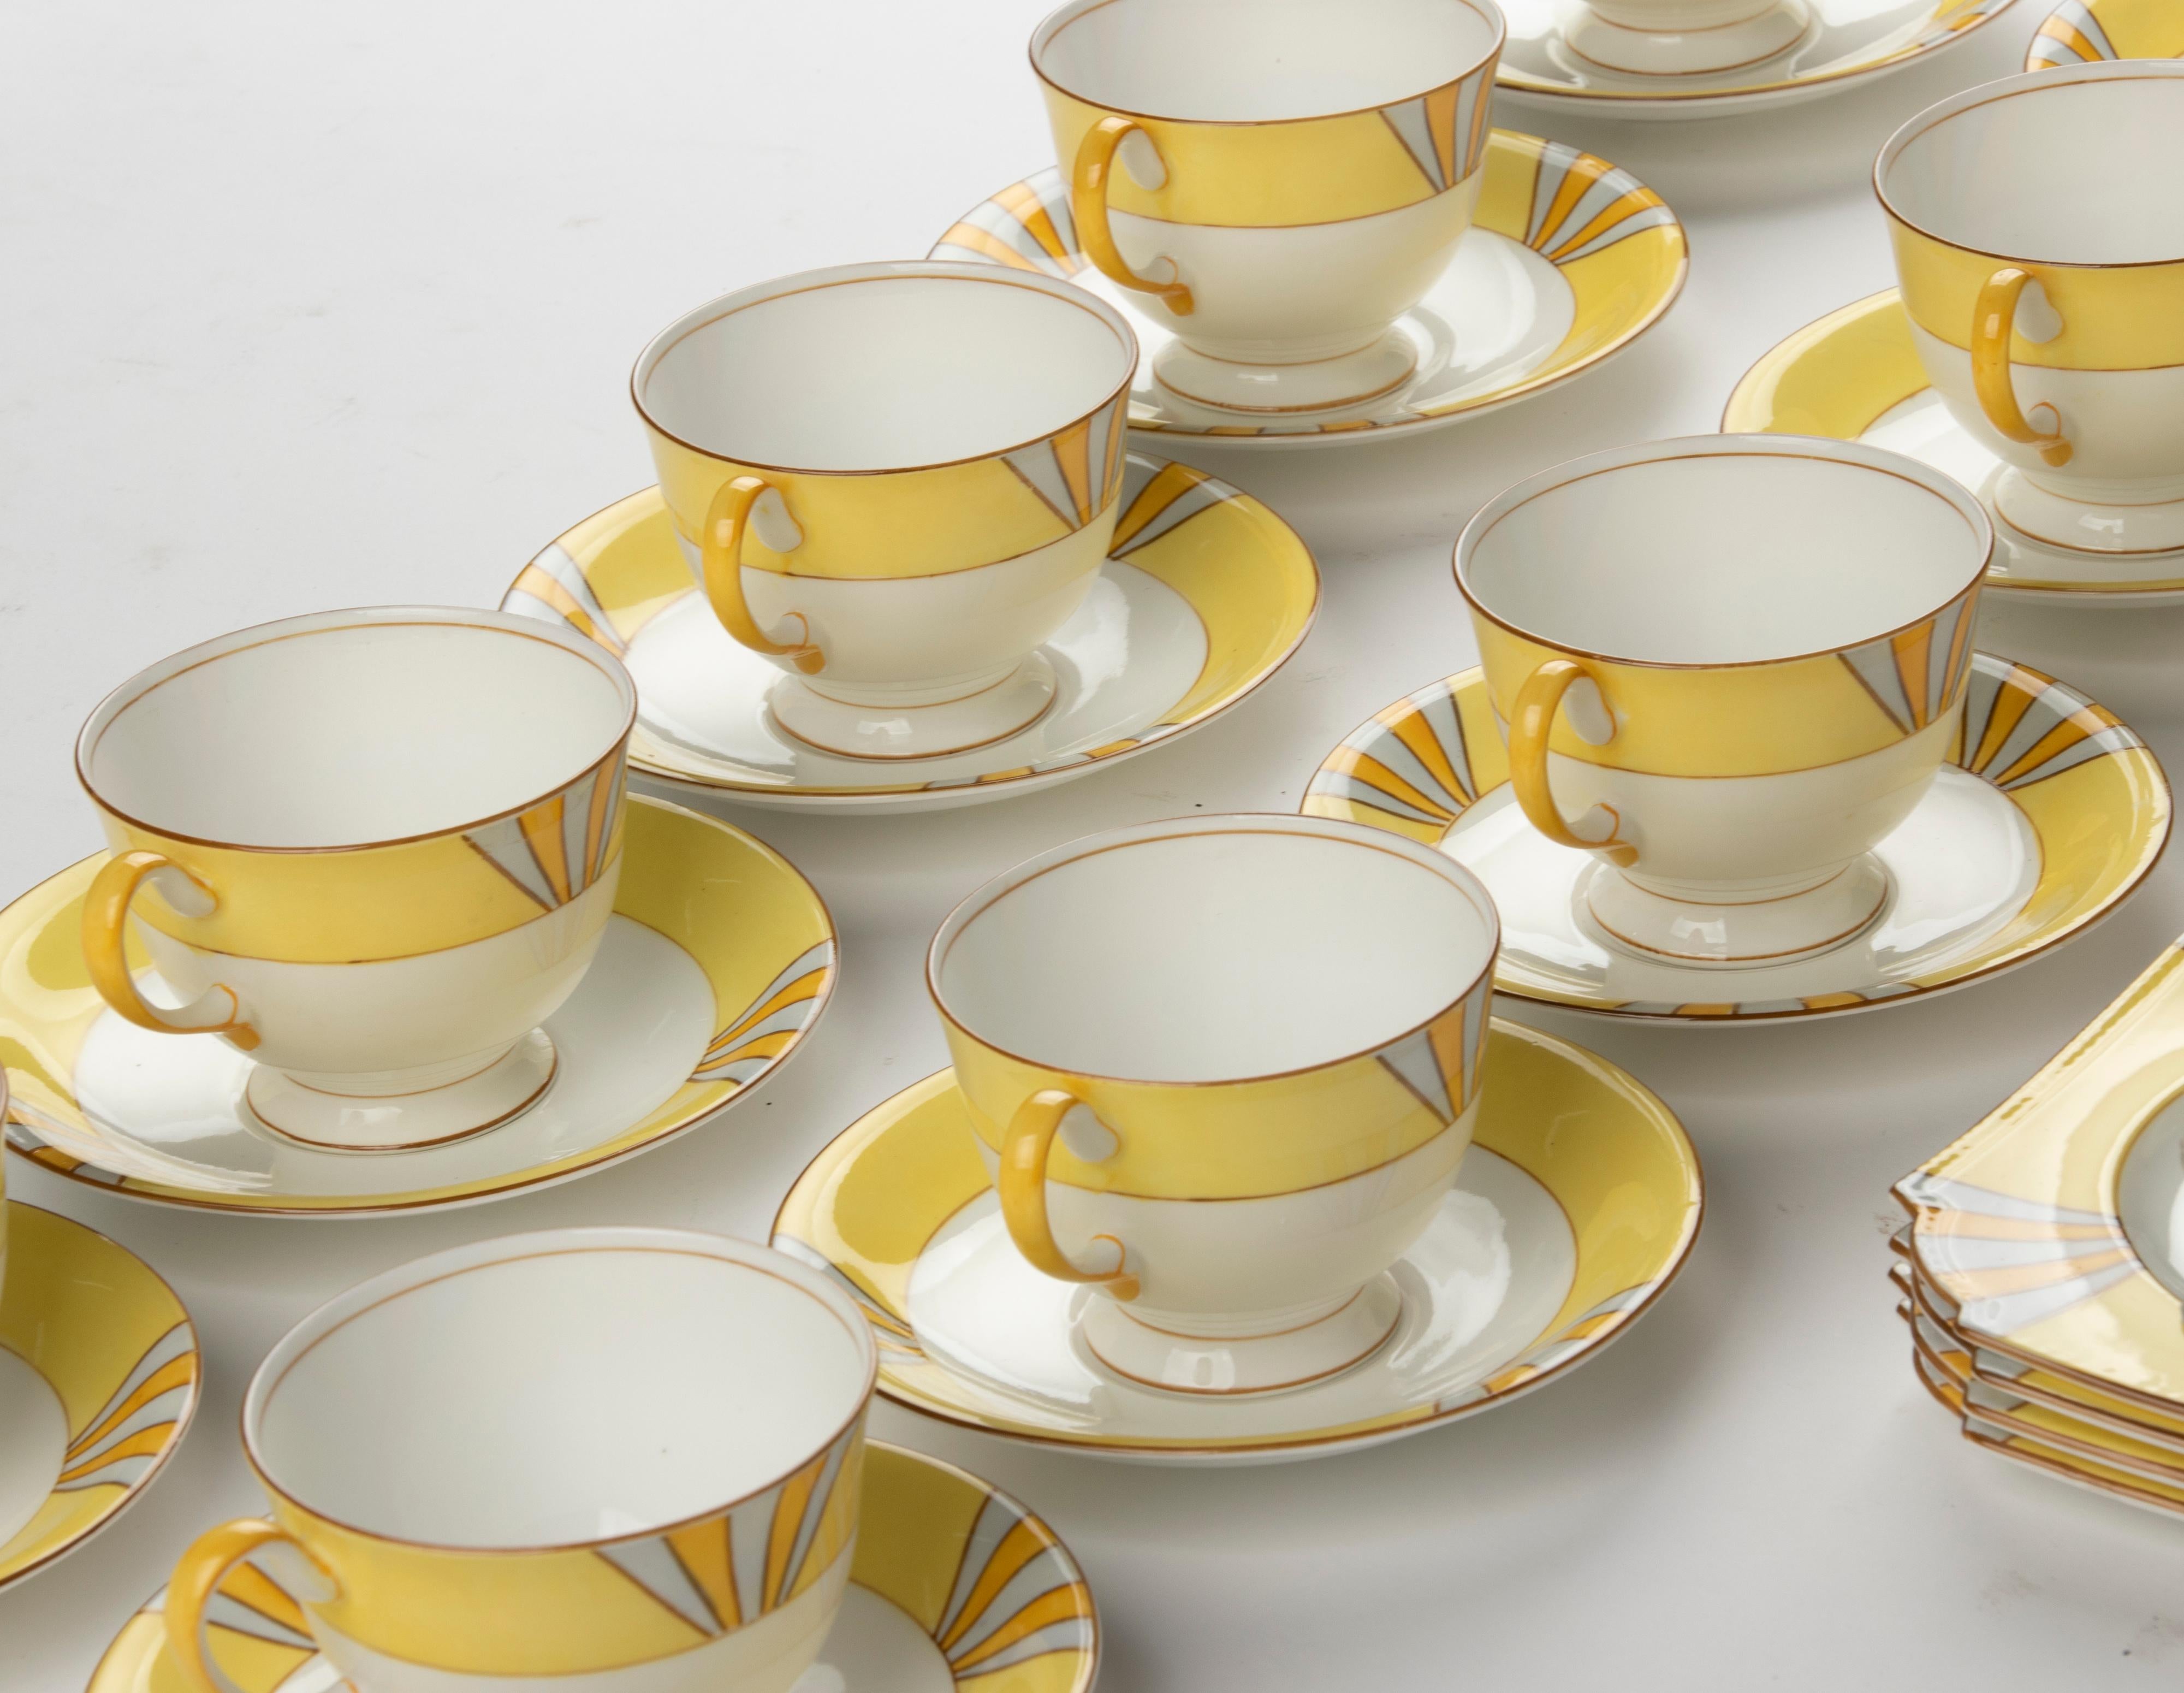 Hand-Crafted 20-Piece Art Deco Tea Set Made by Aynsley